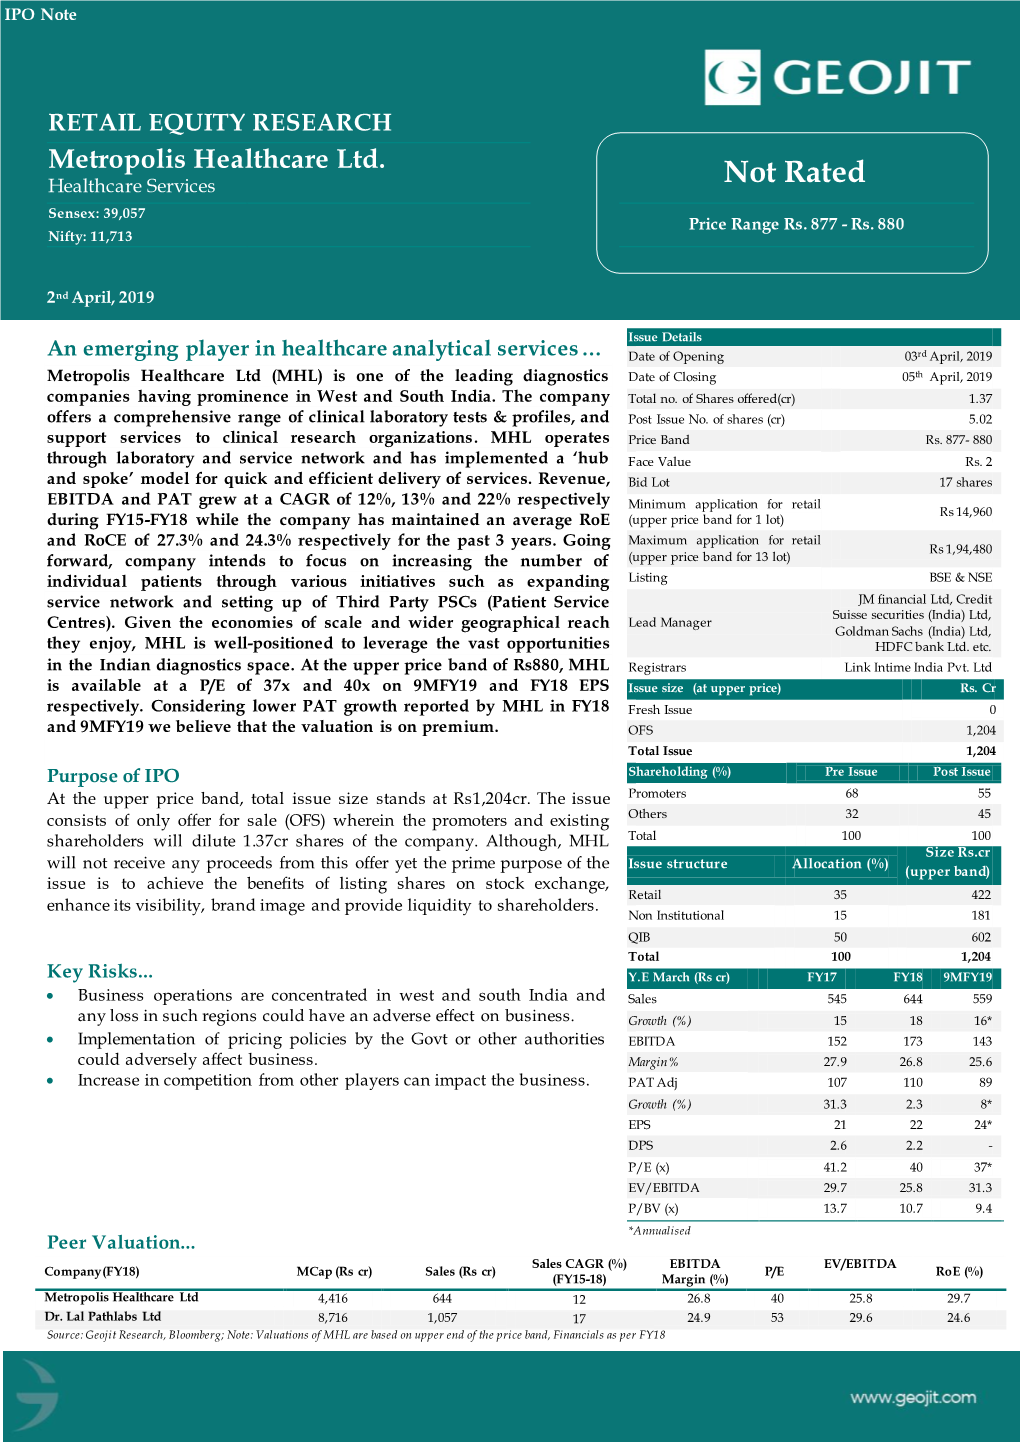 Retail Equity Research